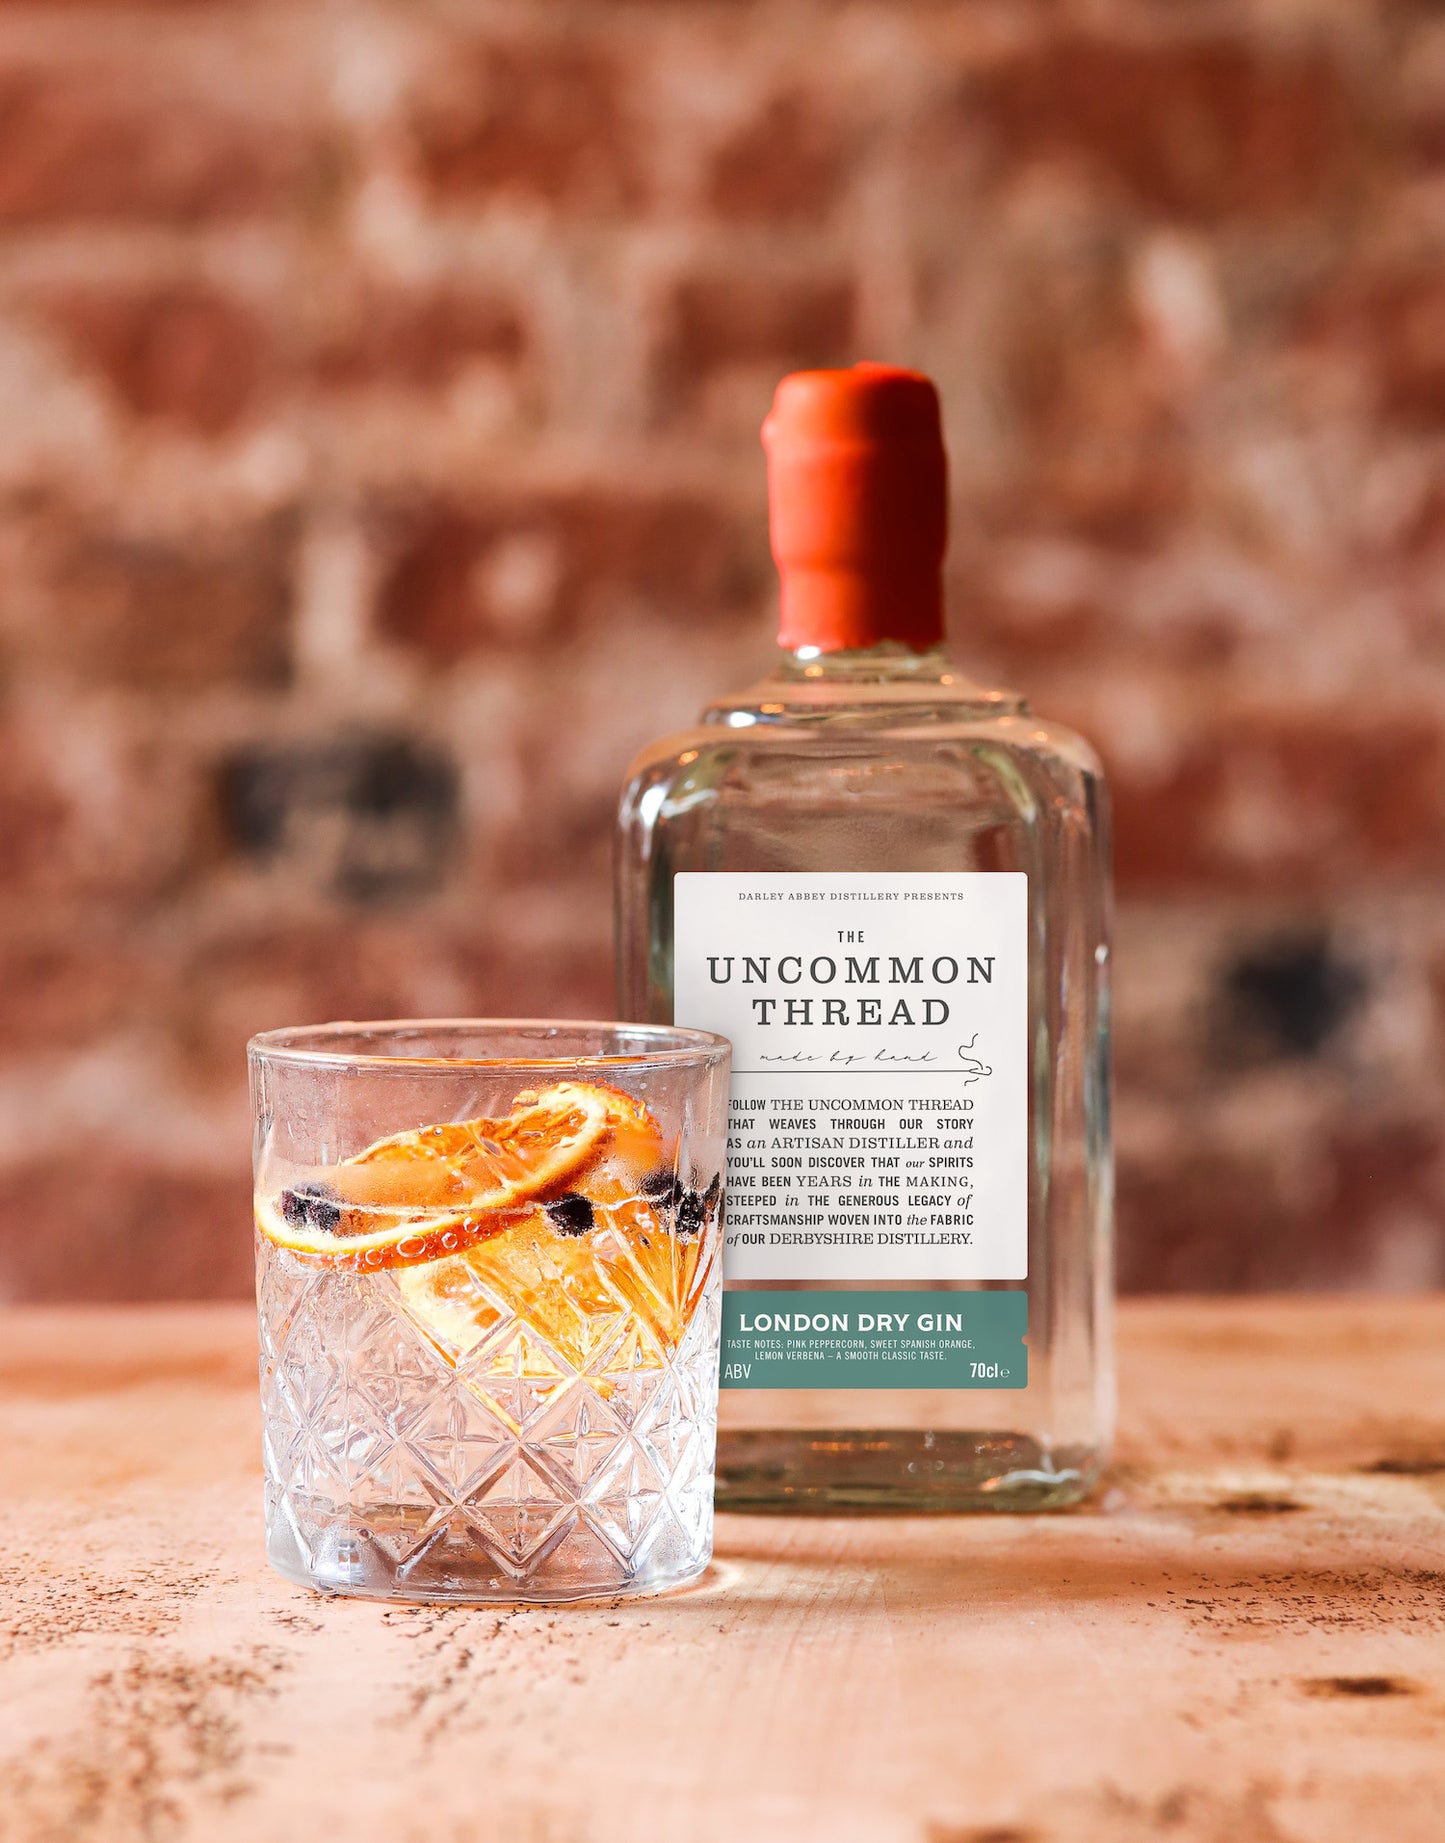 The Uncommon Thread, London Dry Gin